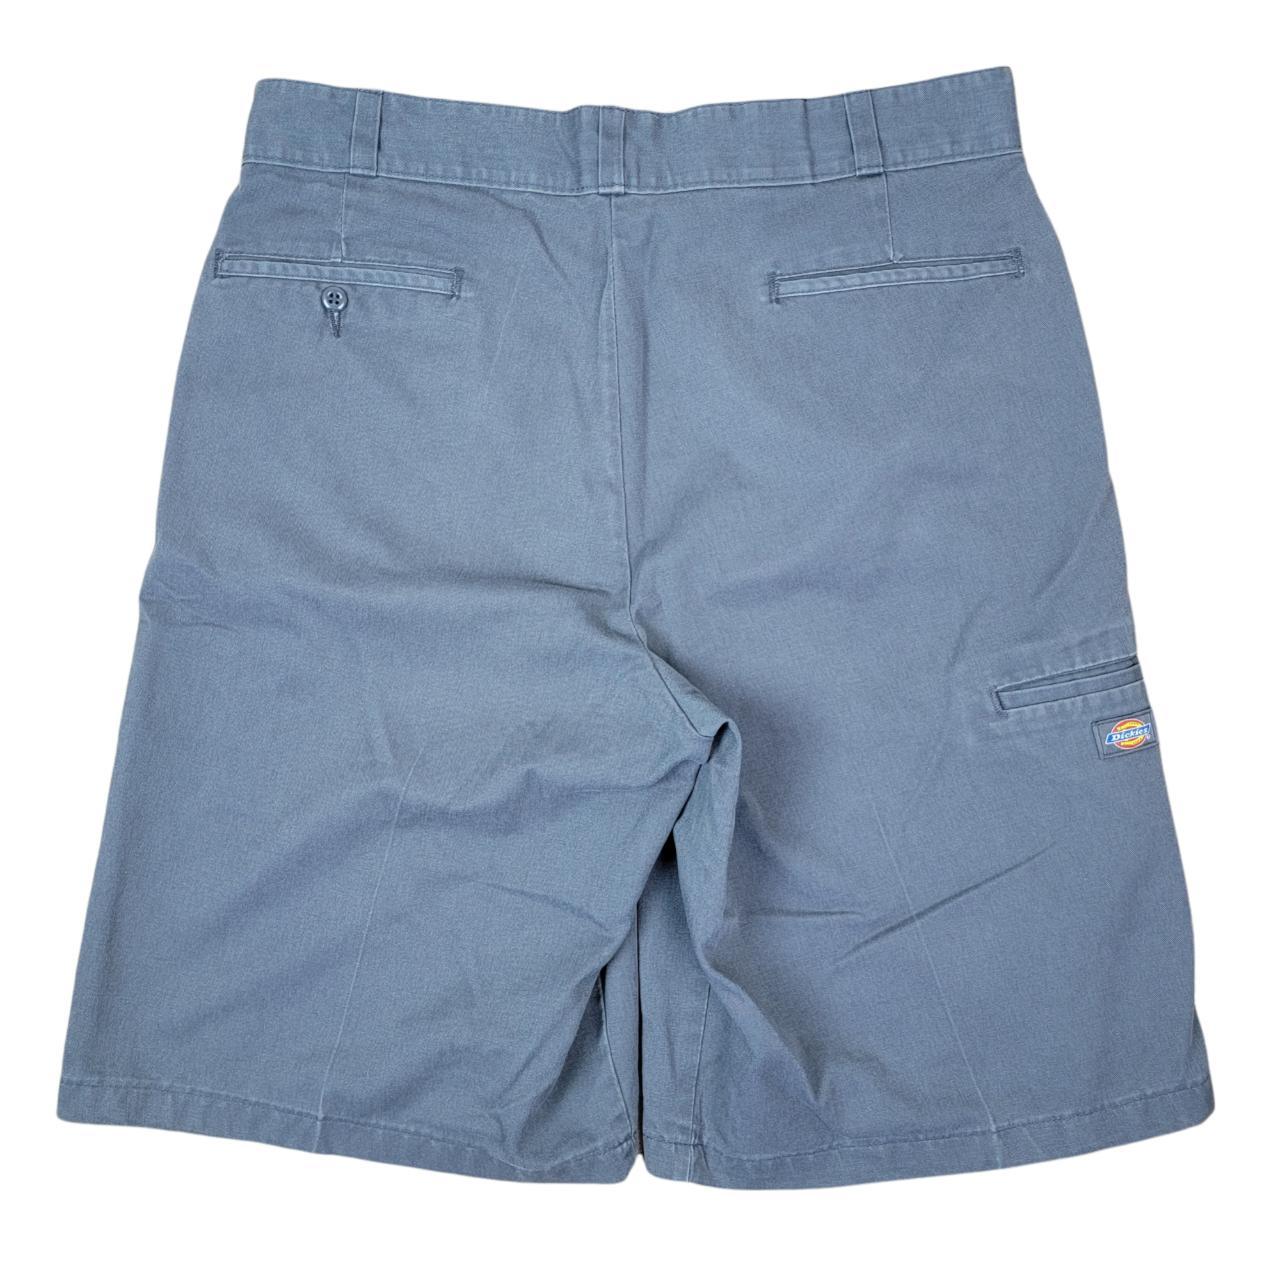 Product Image 2 - Dickies Gray Work Shorts 34

Brand: